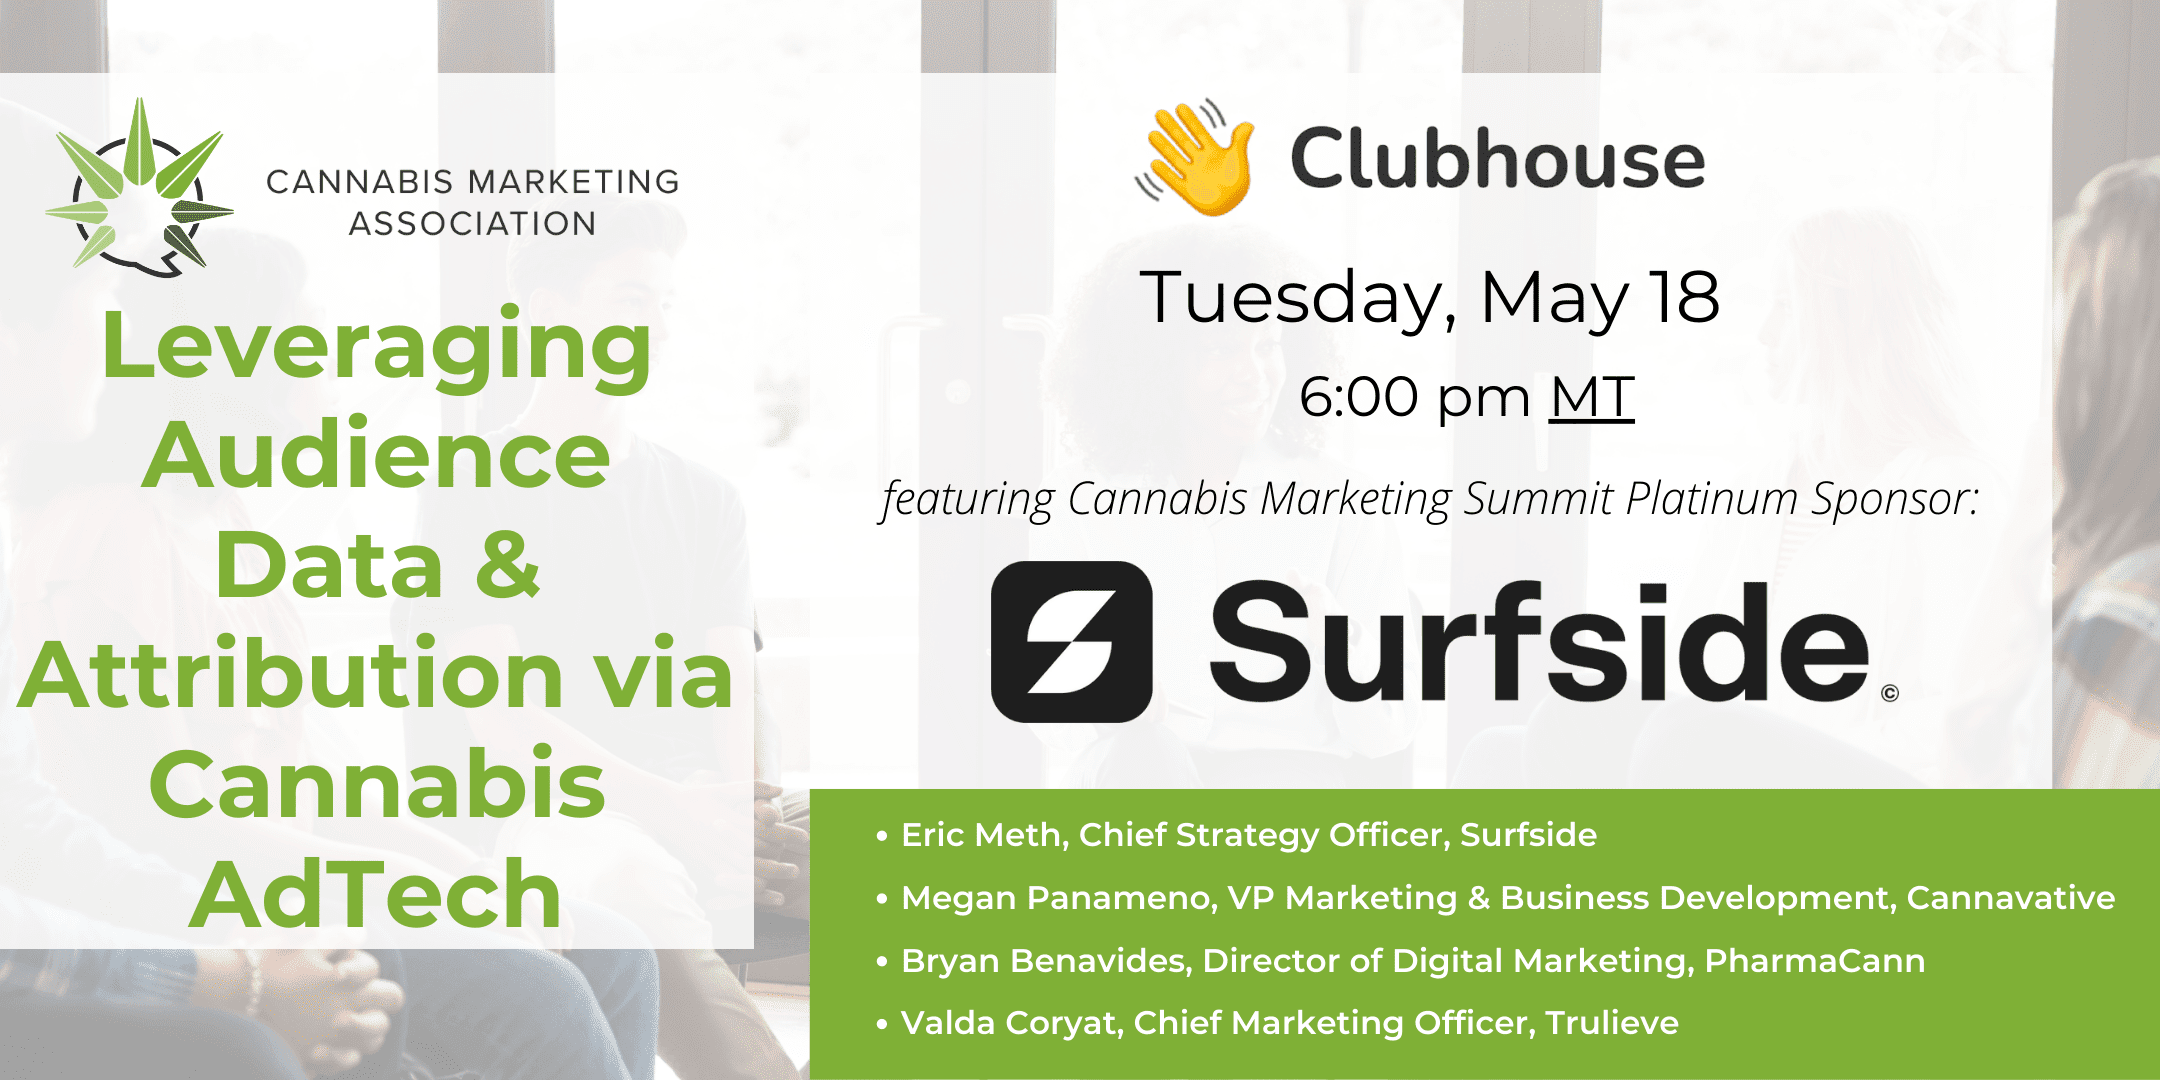 Clubhouse: Leveraging Audience Data & Attribution via Cannabis AdTech